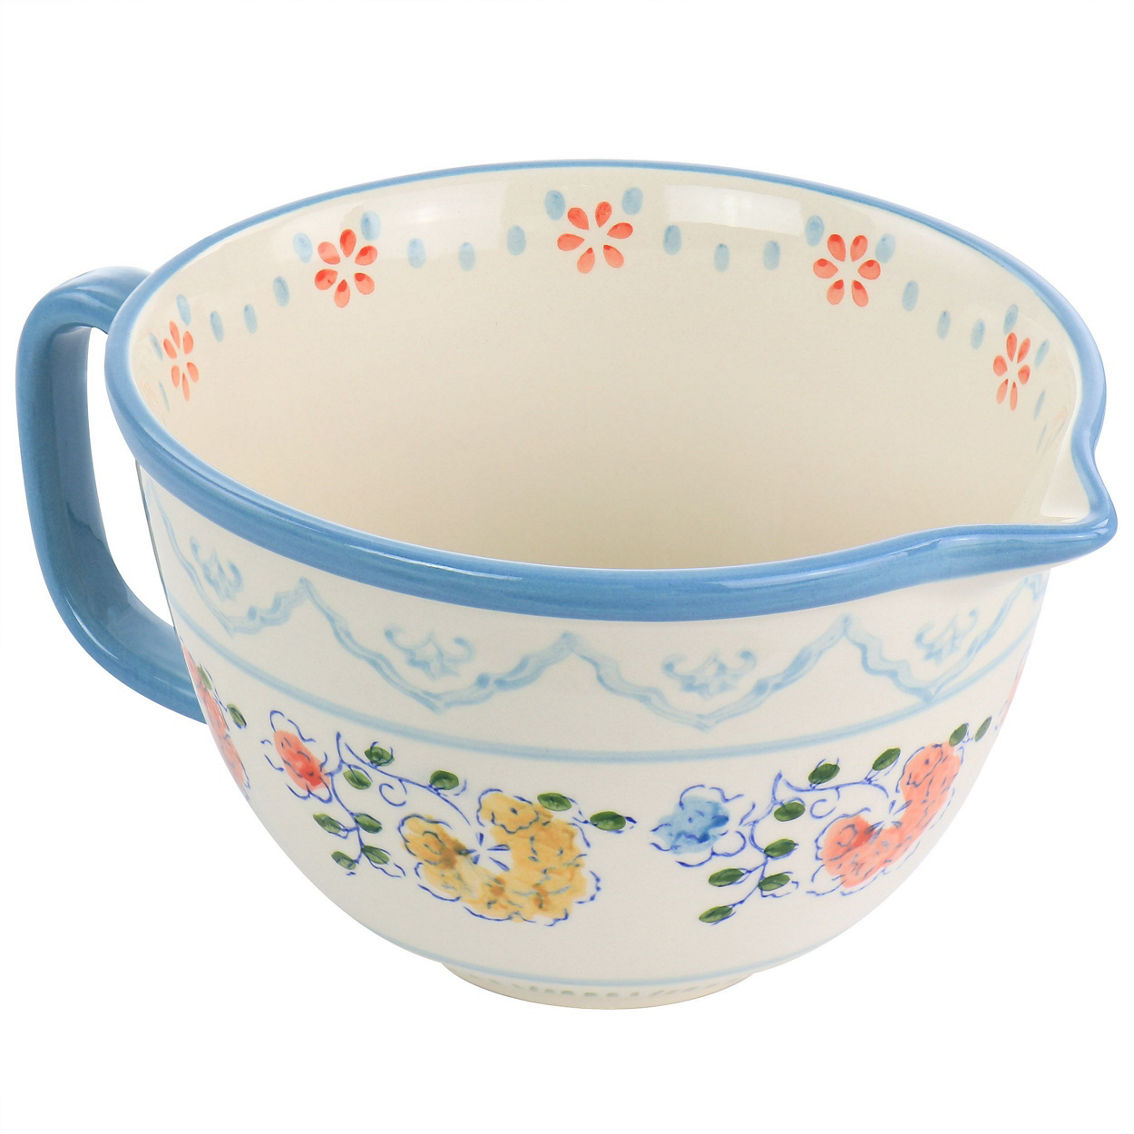 Gibson Elite Anaya Hand Painted 2 Quart Floral Stoneware Batter Bowl with Blue T - Image 2 of 5